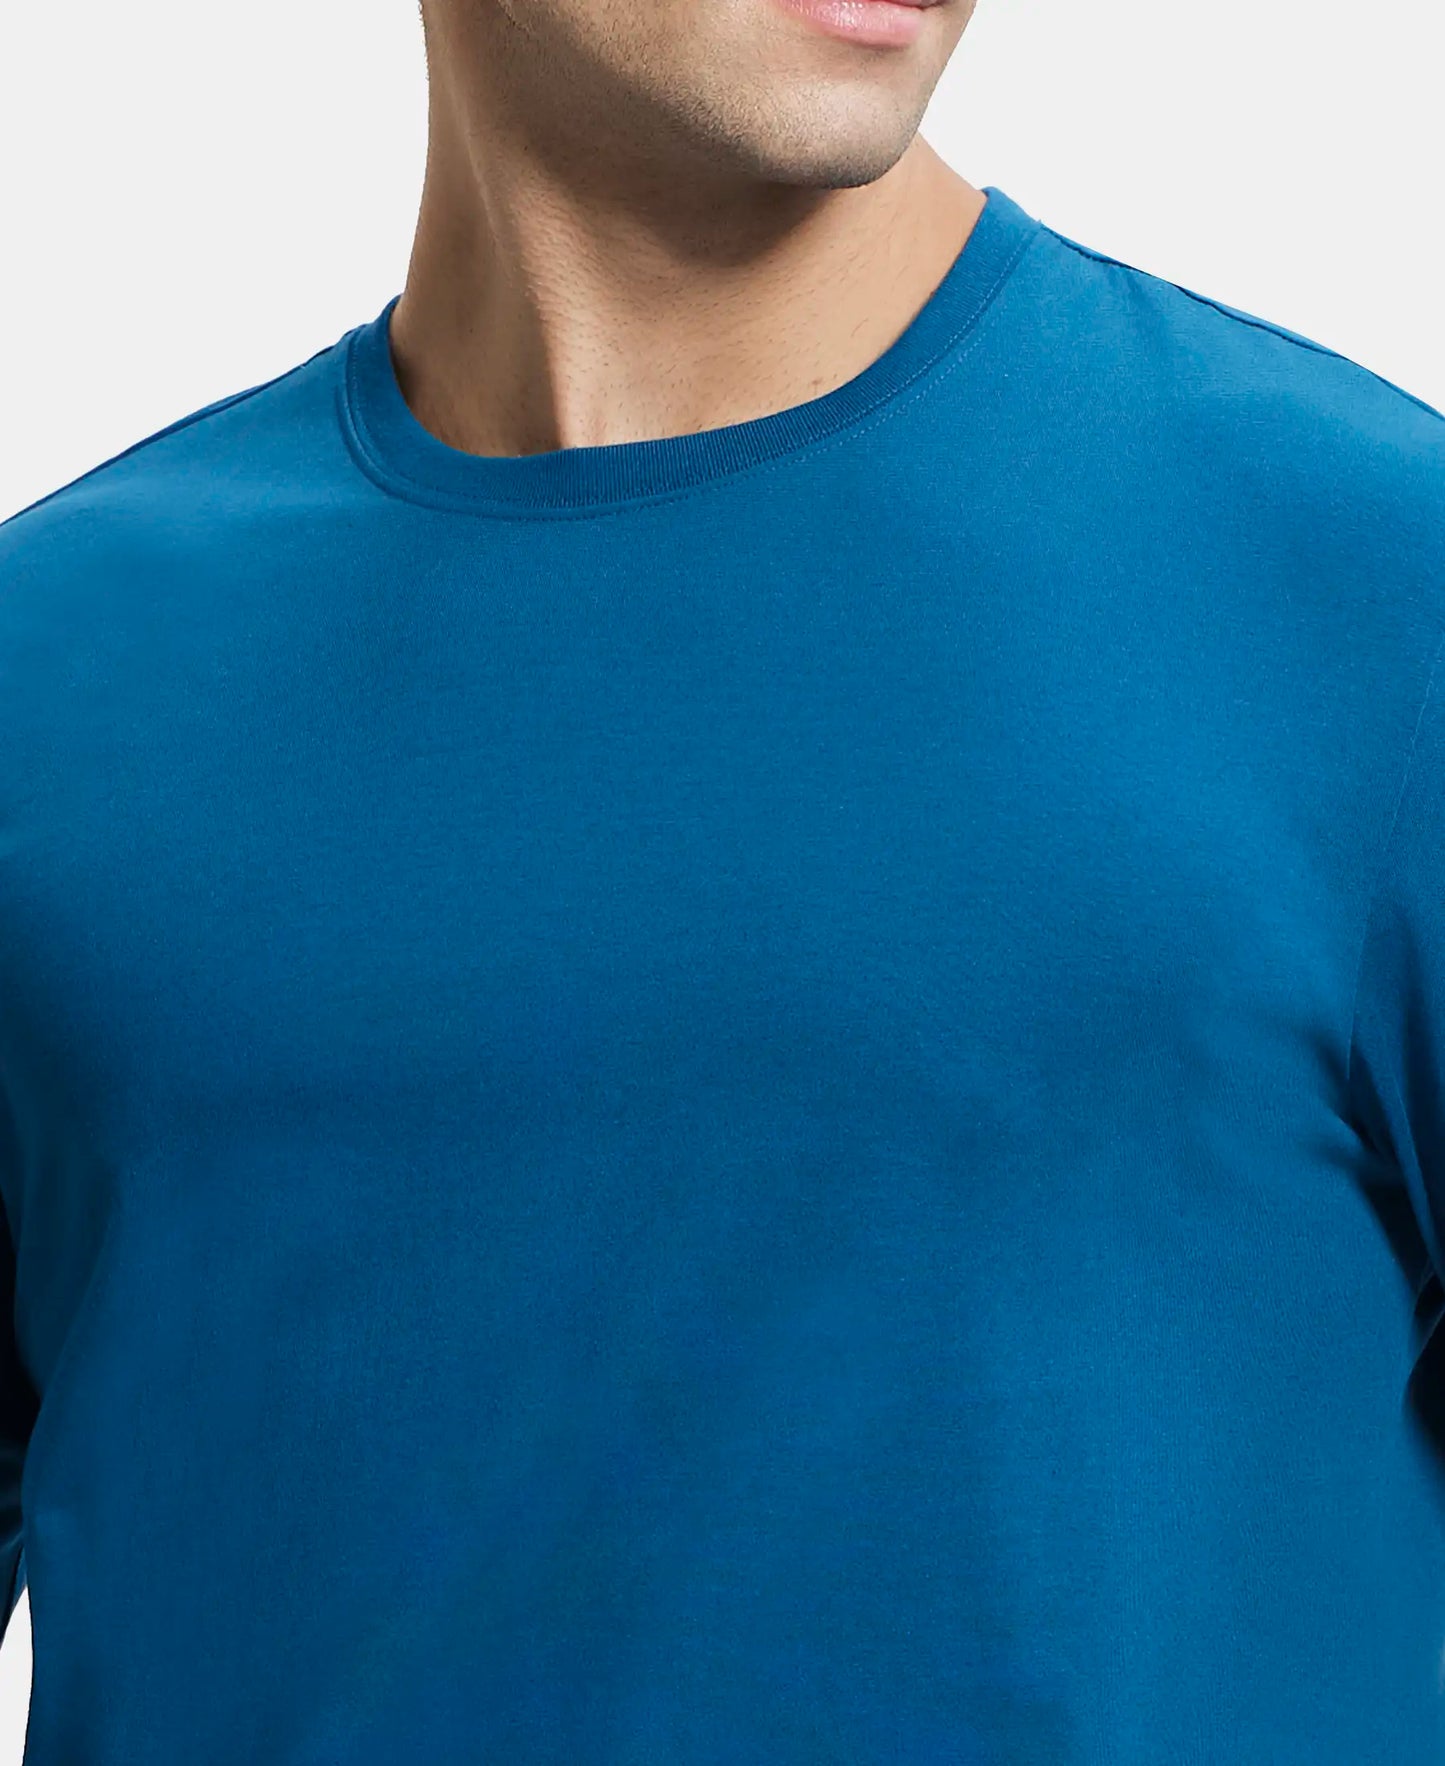 Super Combed Cotton Rich Solid Round Neck Full Sleeve T-Shirt - Seaport Teal-6